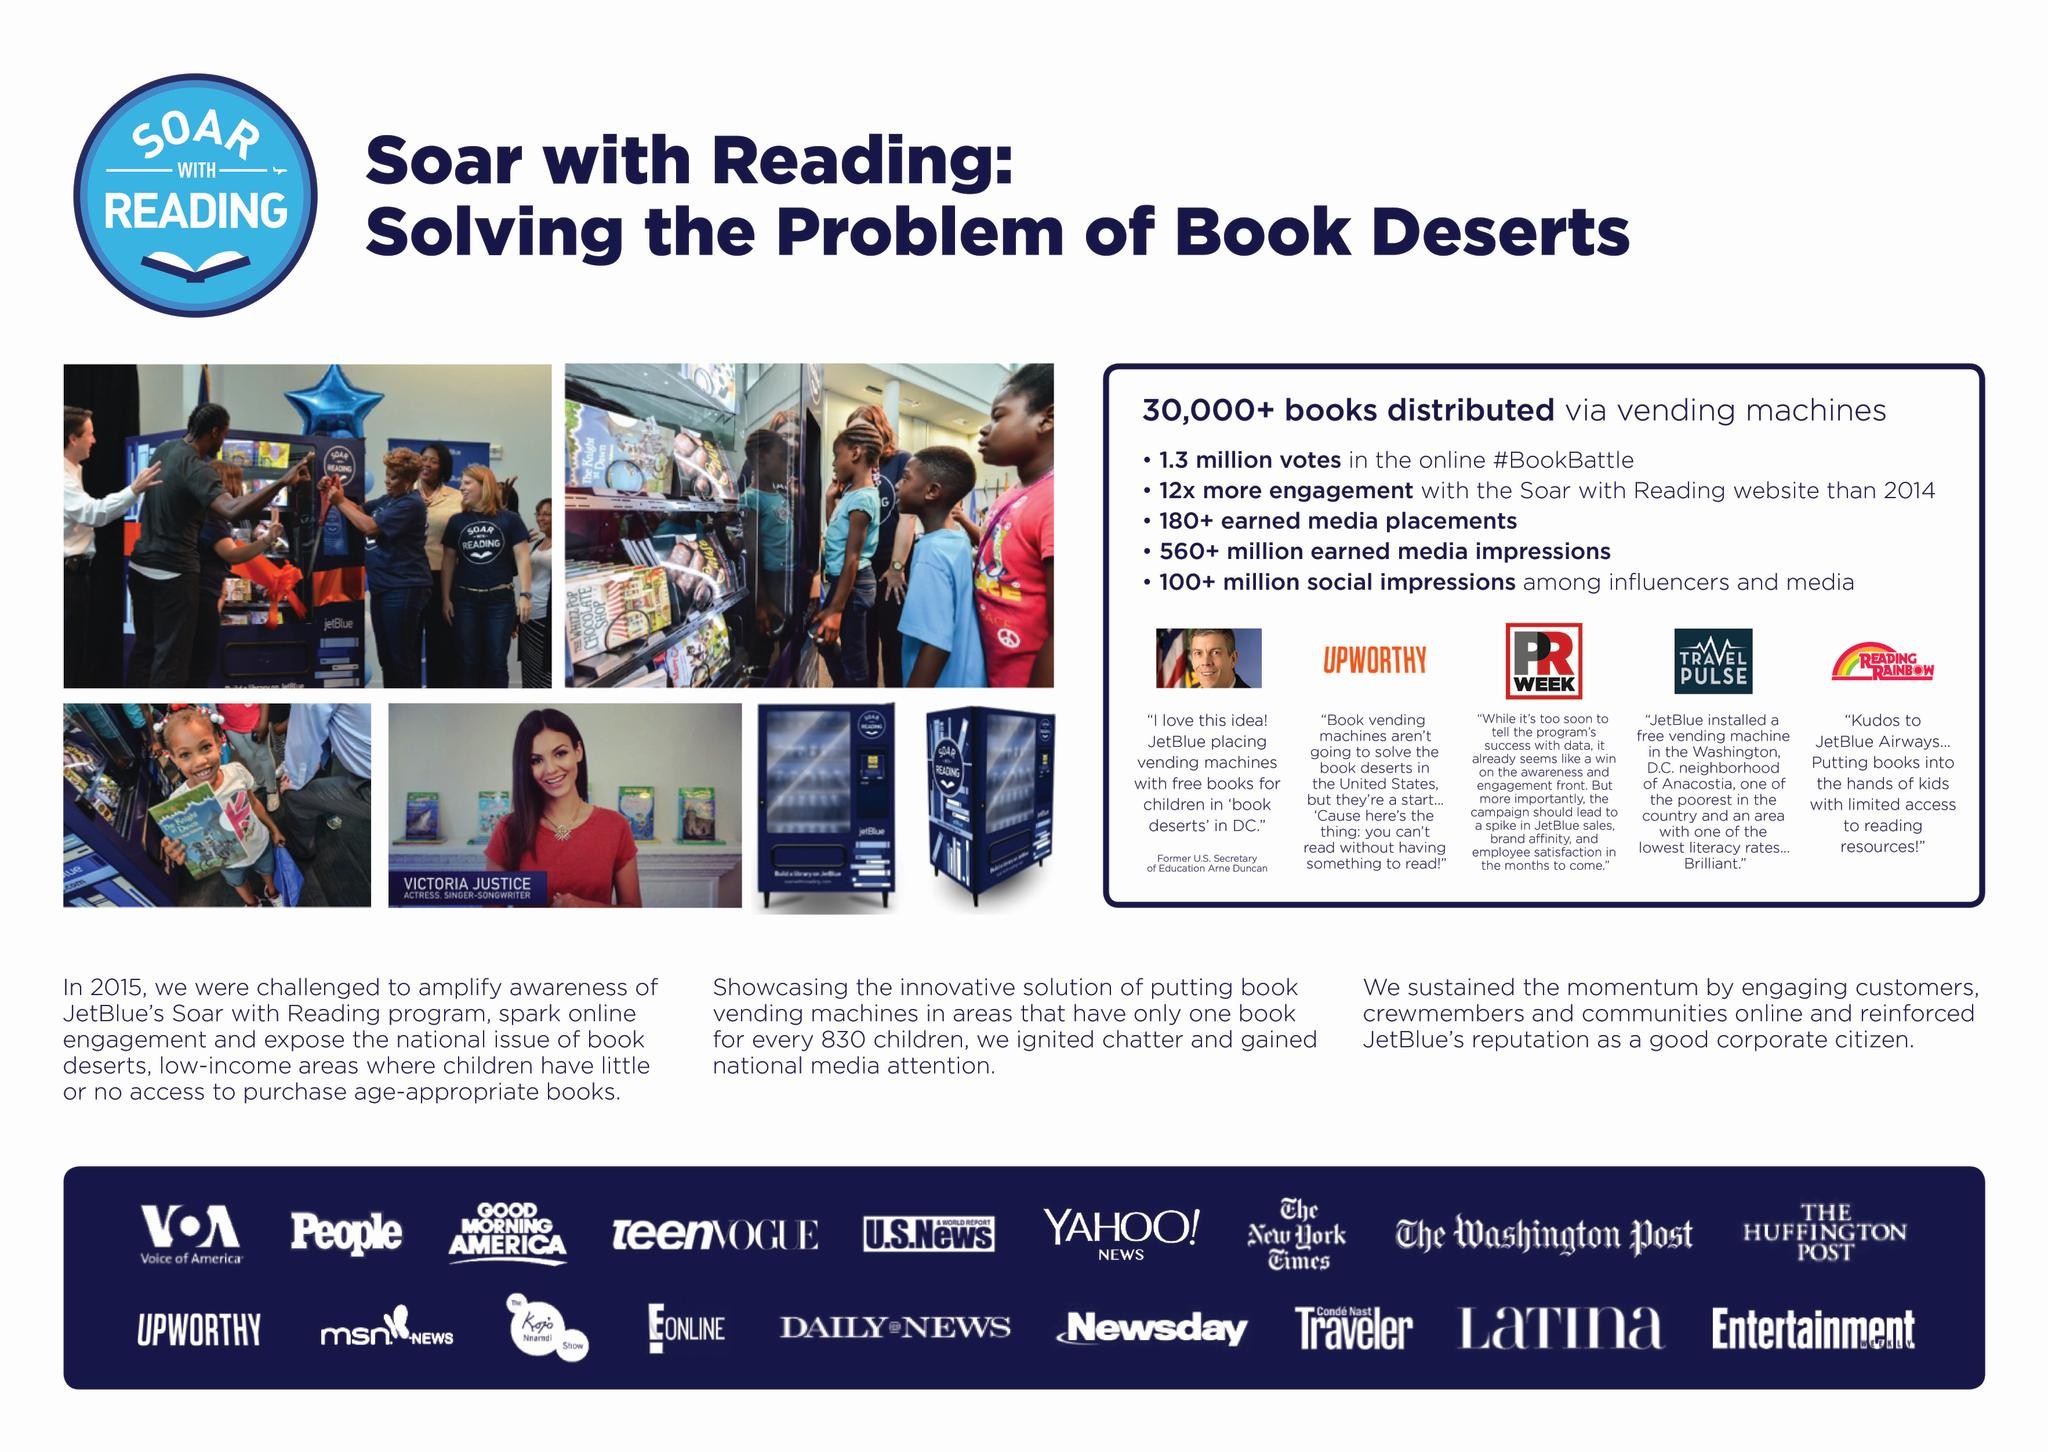 Soar With Reading